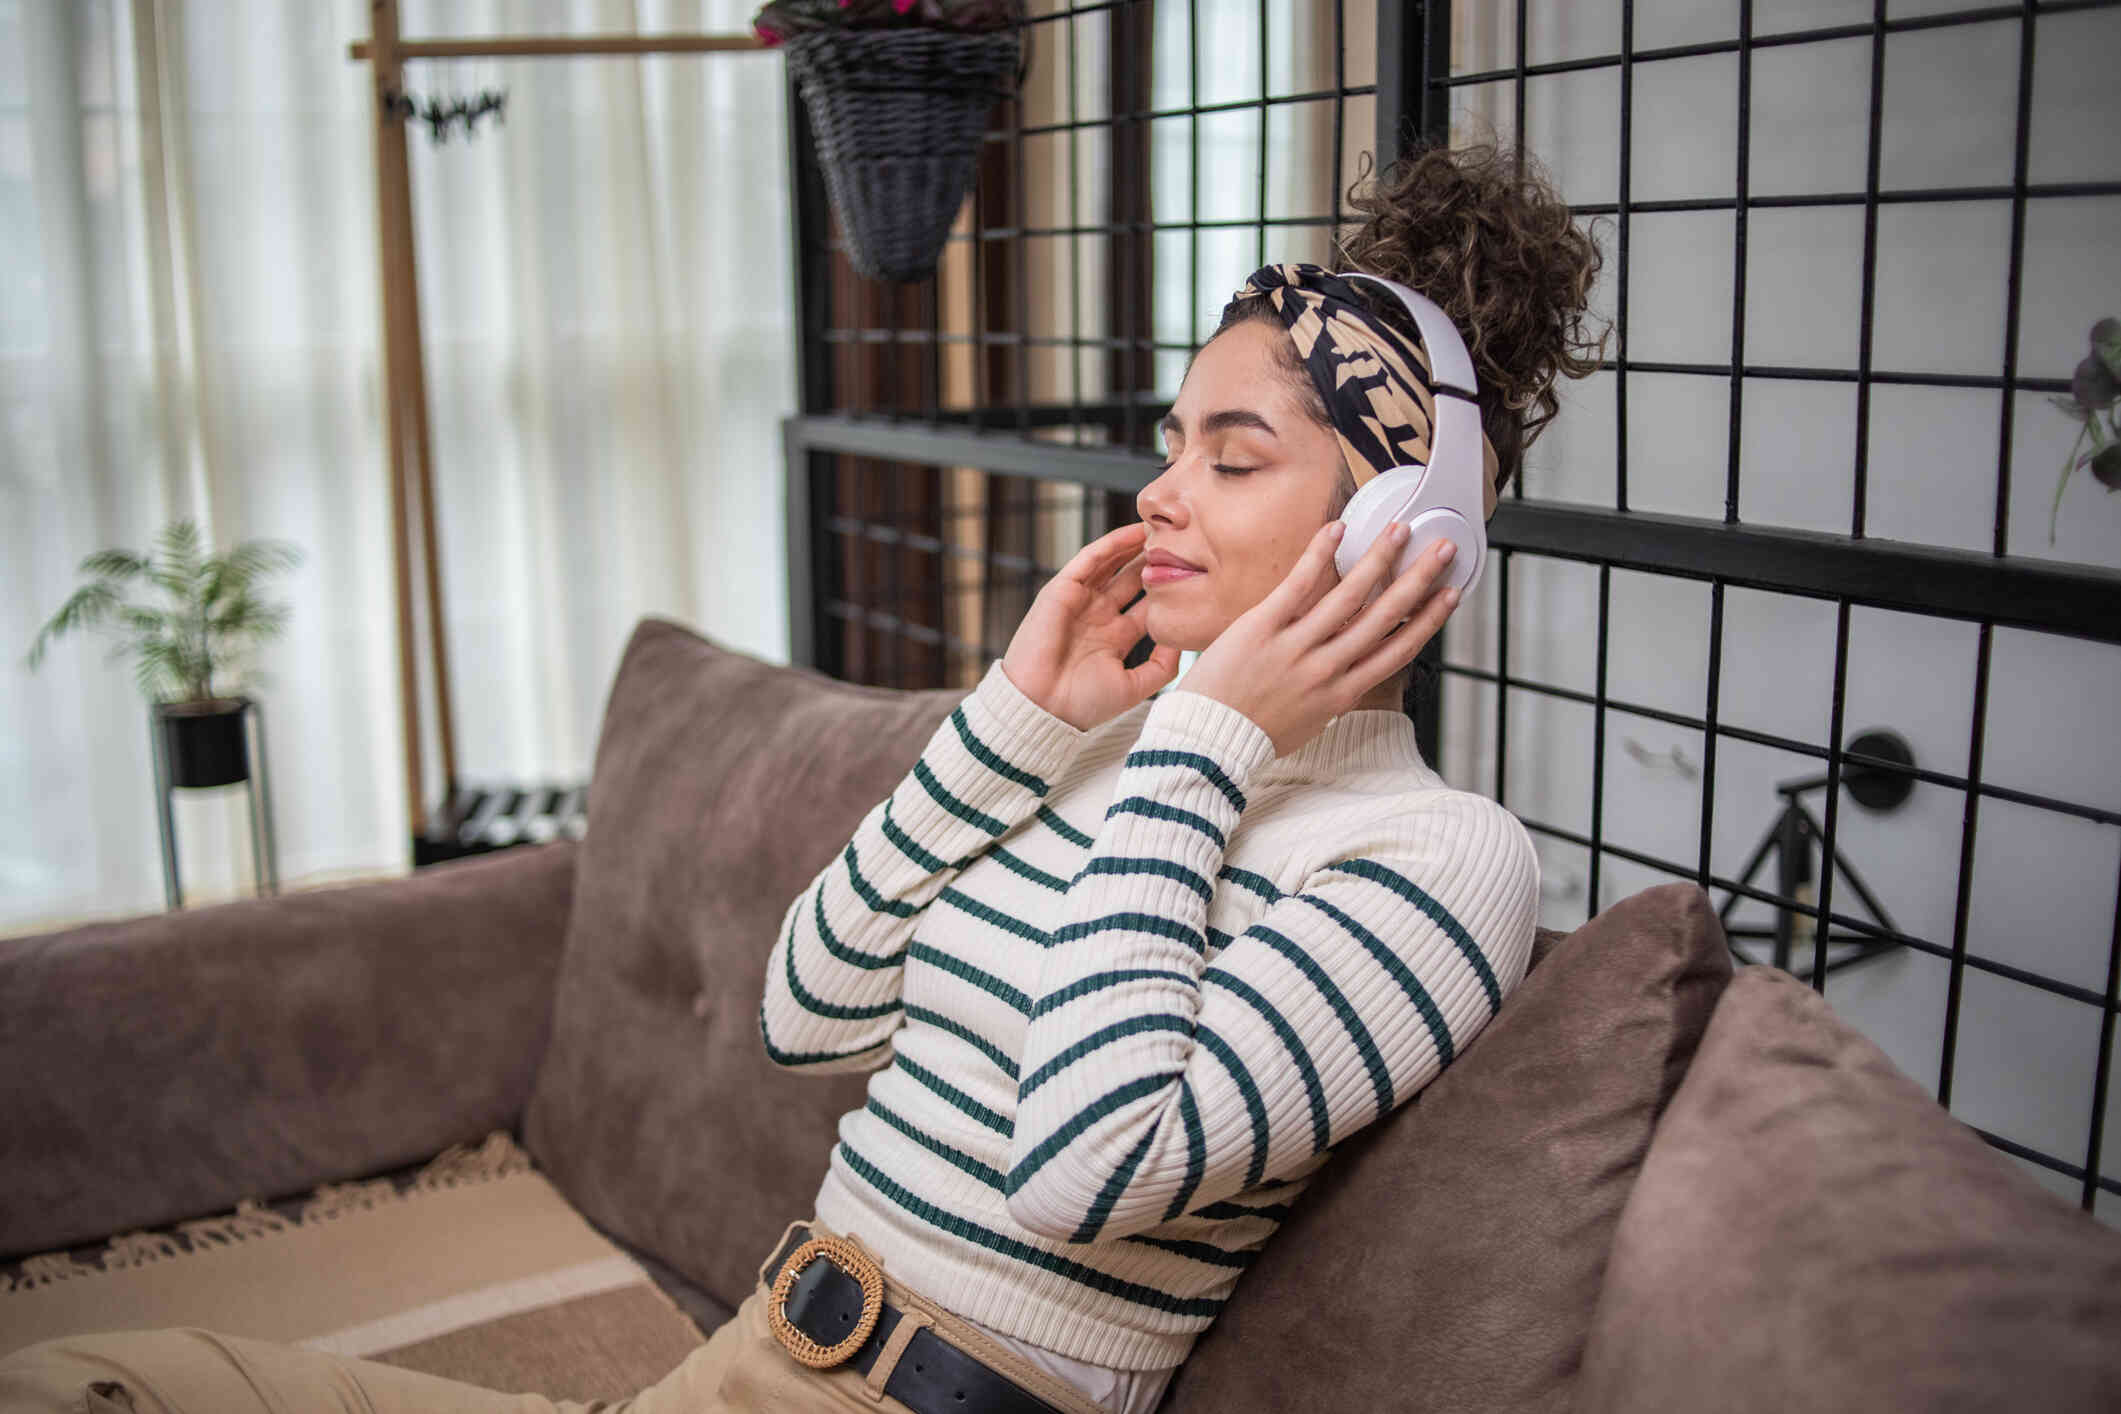 A woman in a striped sweater sits on the couch with white headphones while closing her eyes and gently placing her hands to her ears.